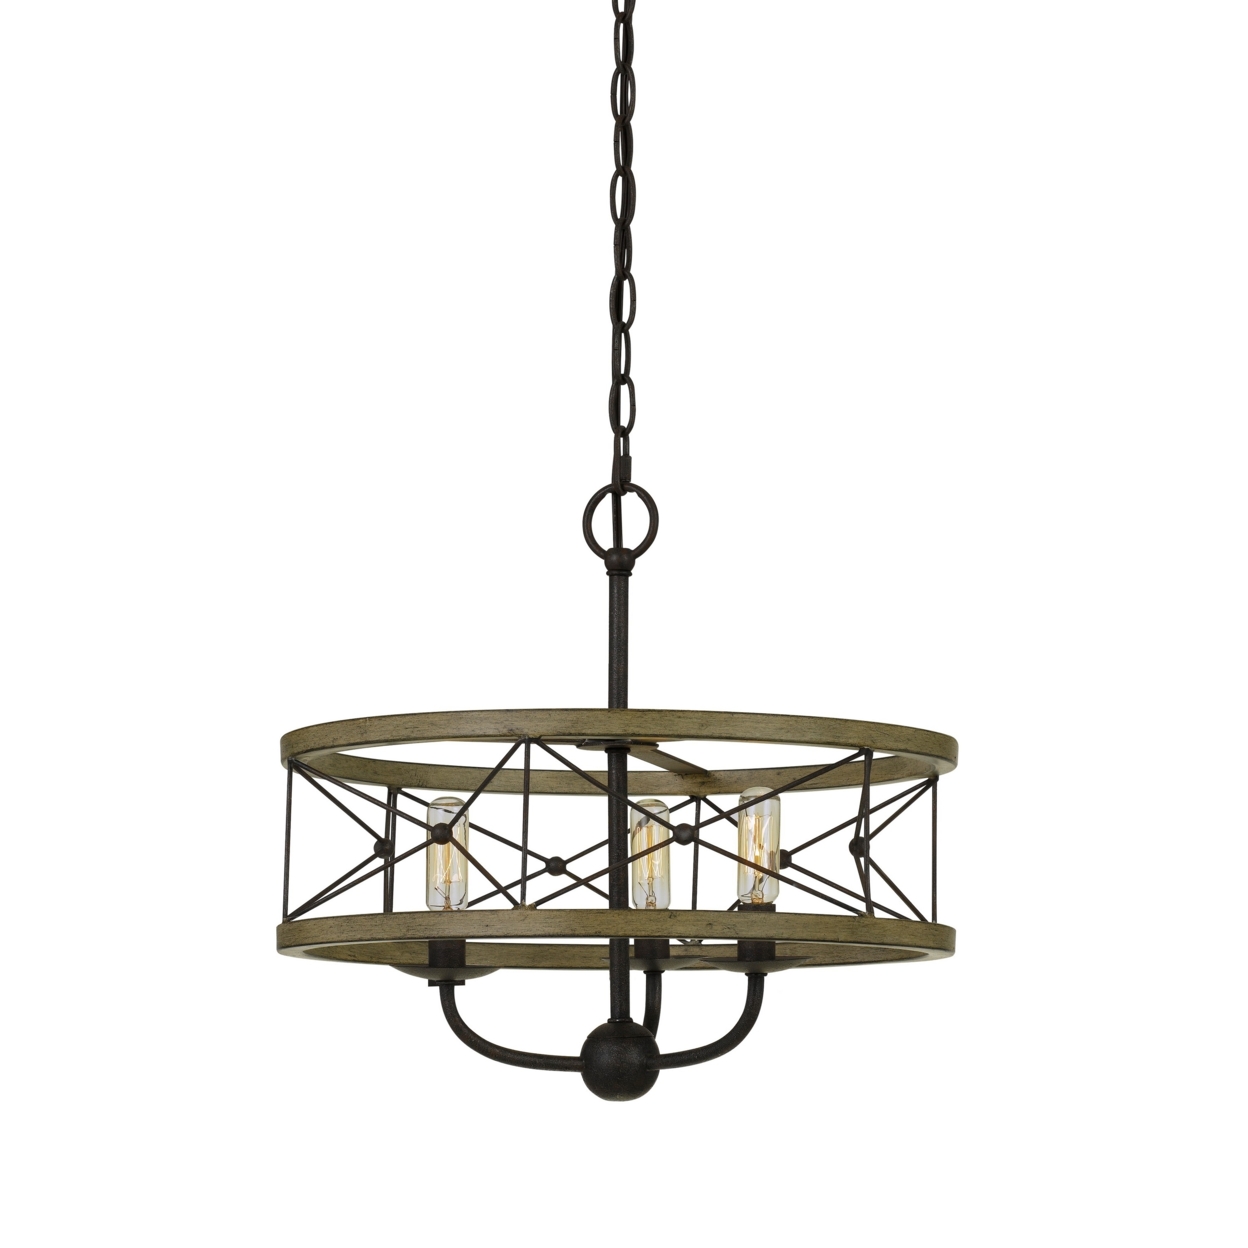 3 Bulb Hanging Pendant Fixture With Wooden And Metal Frame, Brown And Black- Saltoro Sherpi